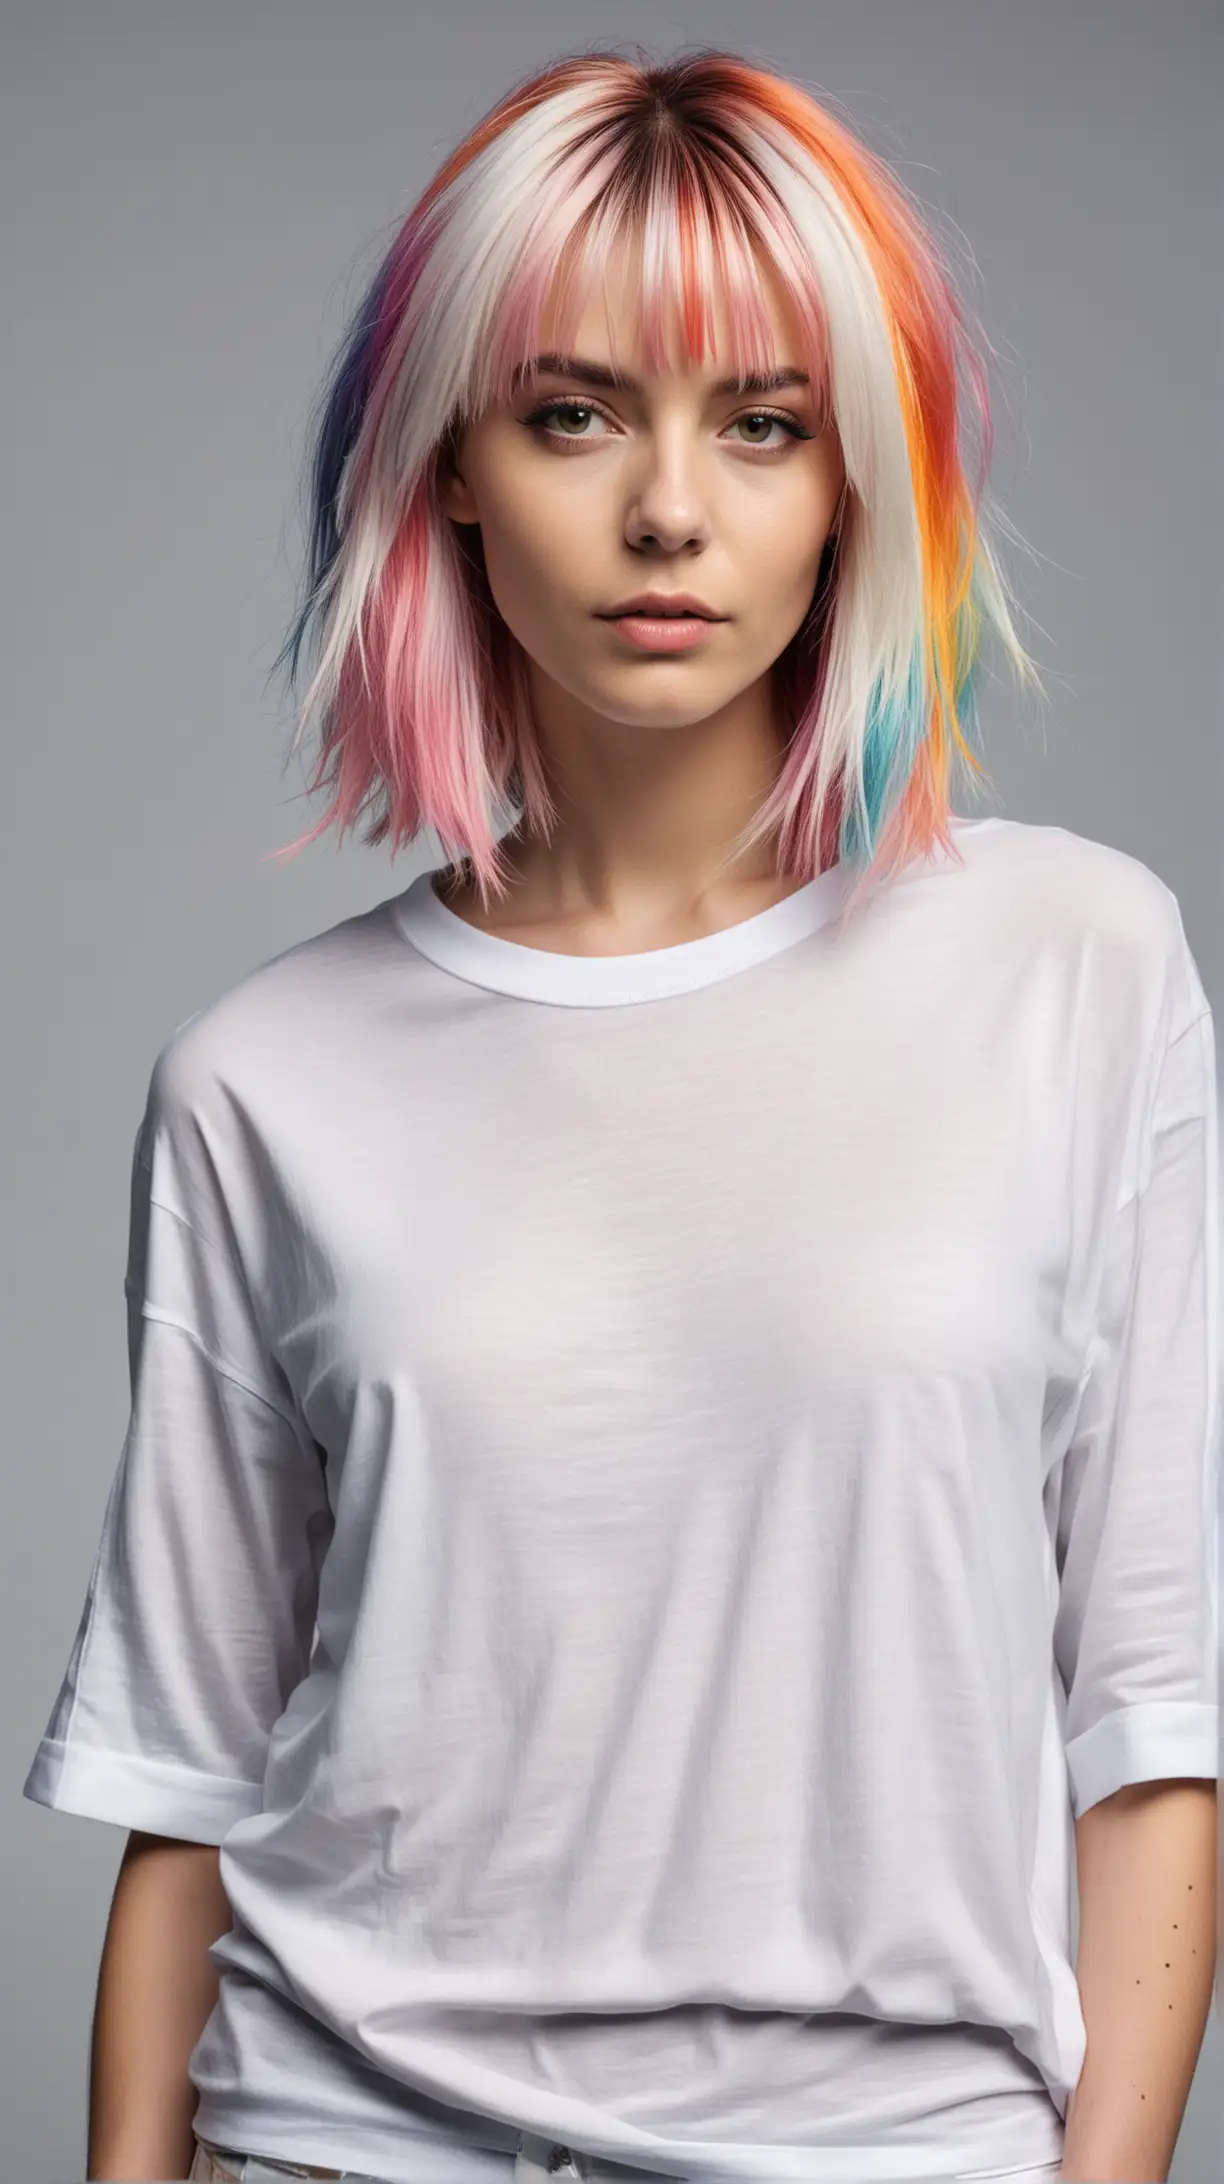 Beautiful model with an Avant-garde haircut, long colorful hair layered, 30 years old, wearing a white T-shirt